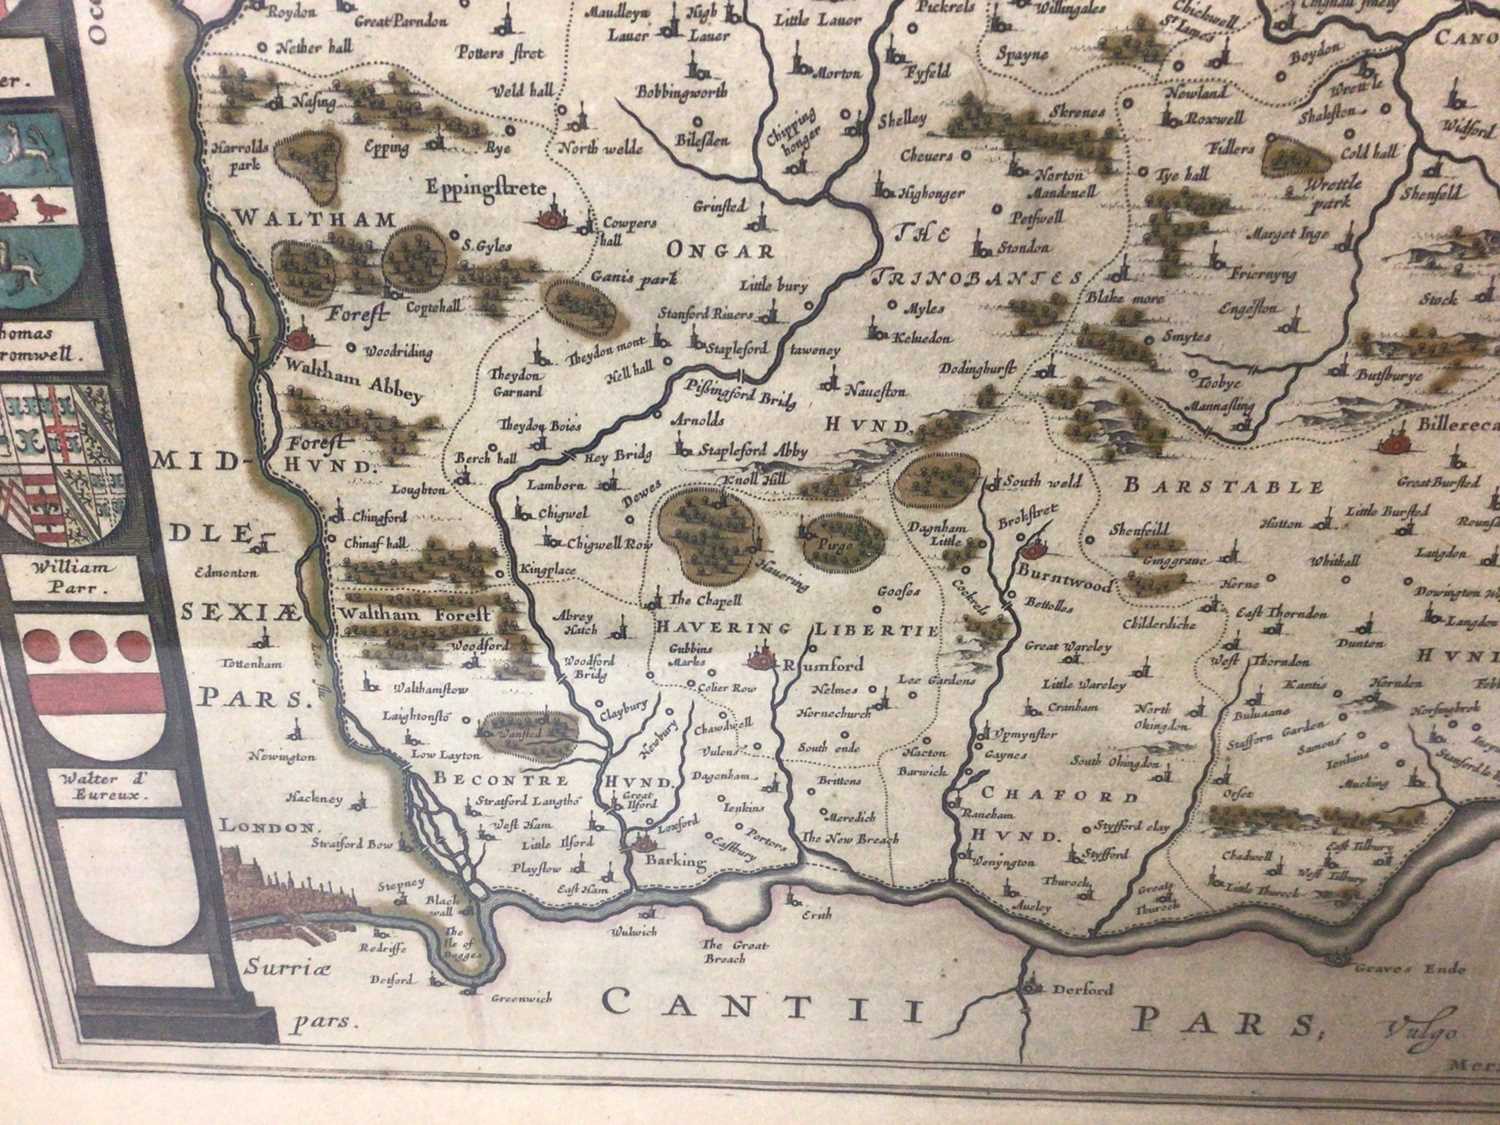 Johannes Blaeu: 17th century hand tinted engraved map of Essex - Image 4 of 6